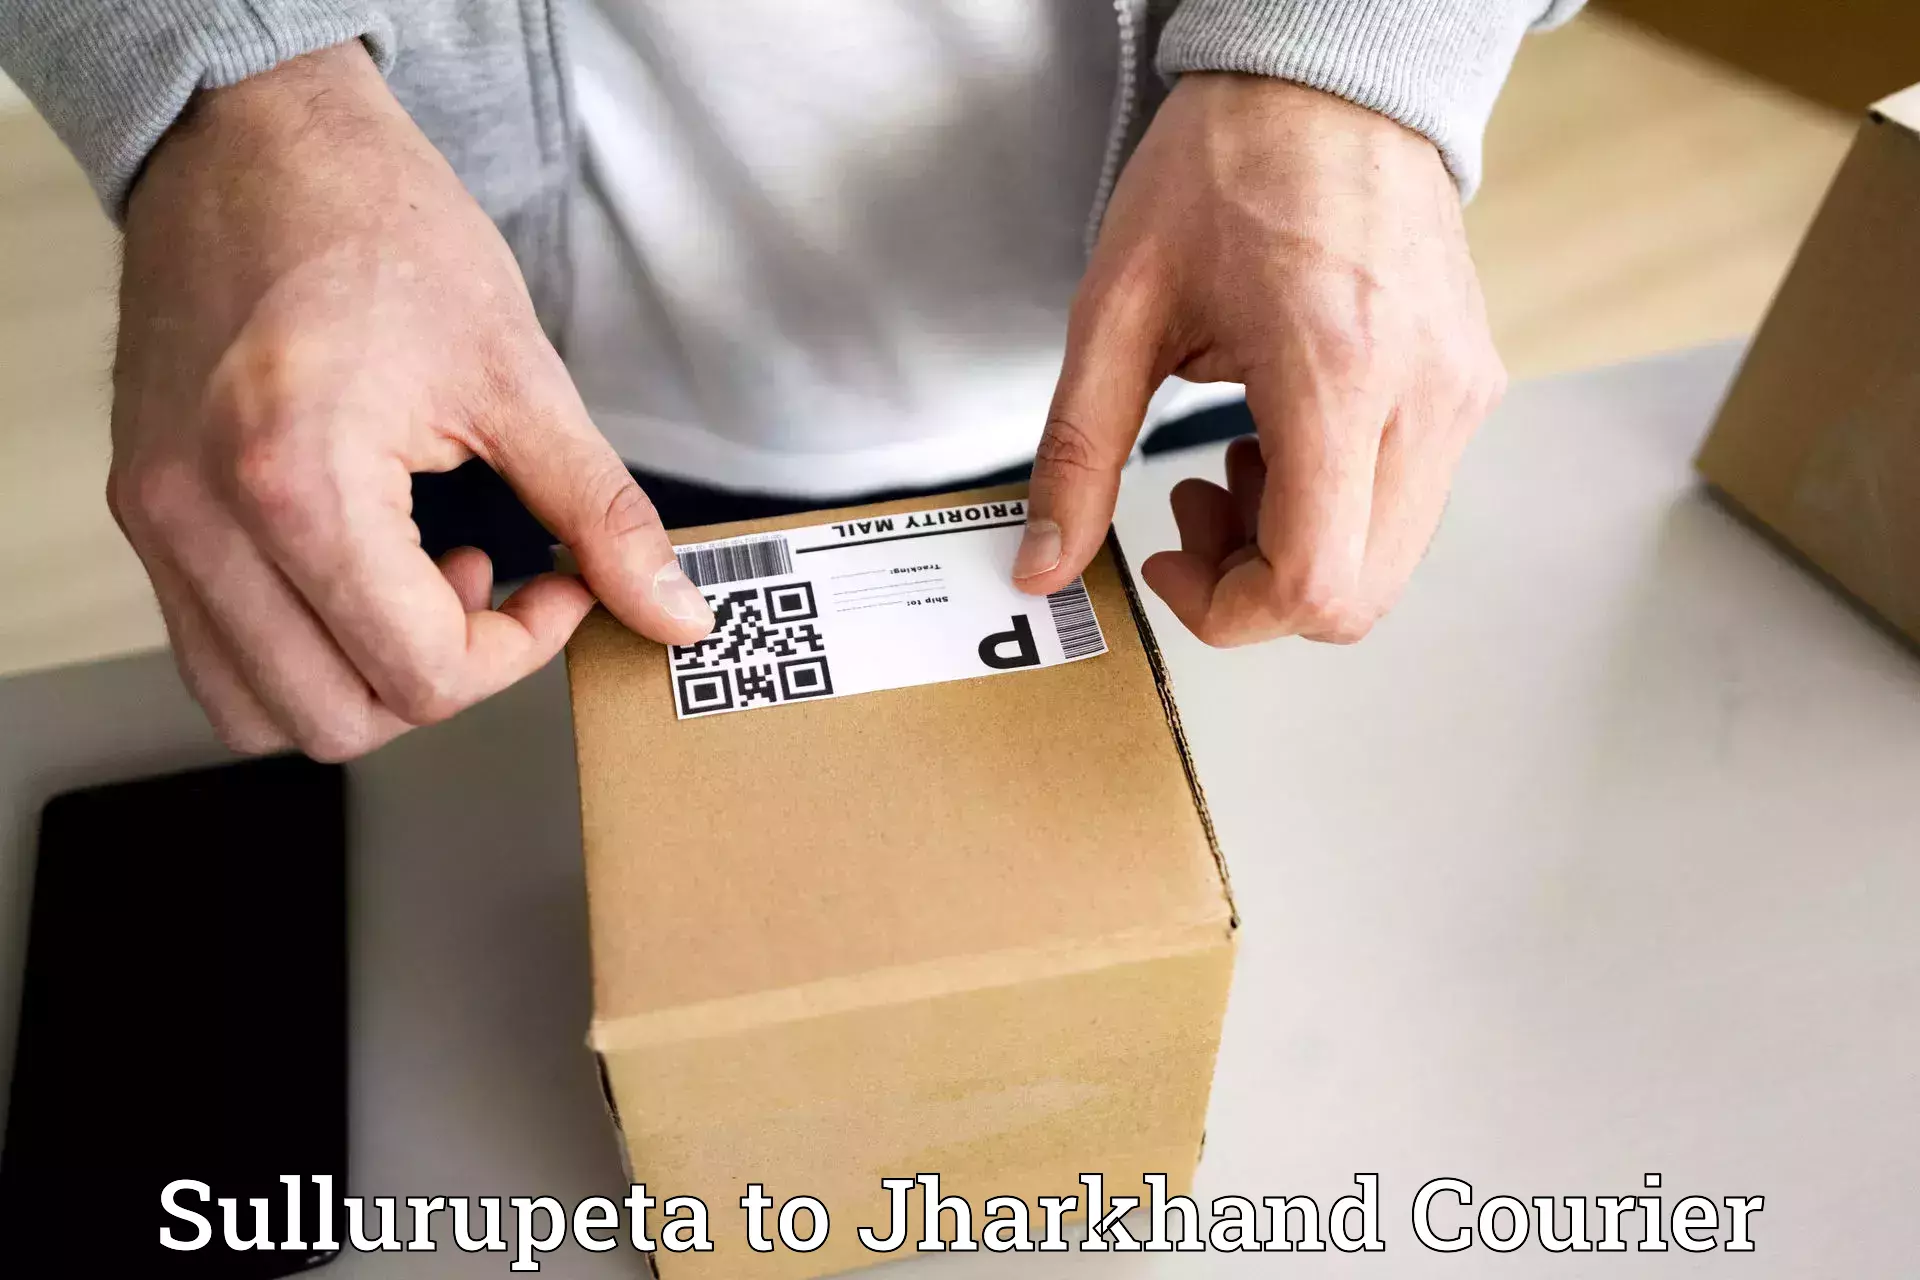 Automated parcel services Sullurupeta to Ramgarh